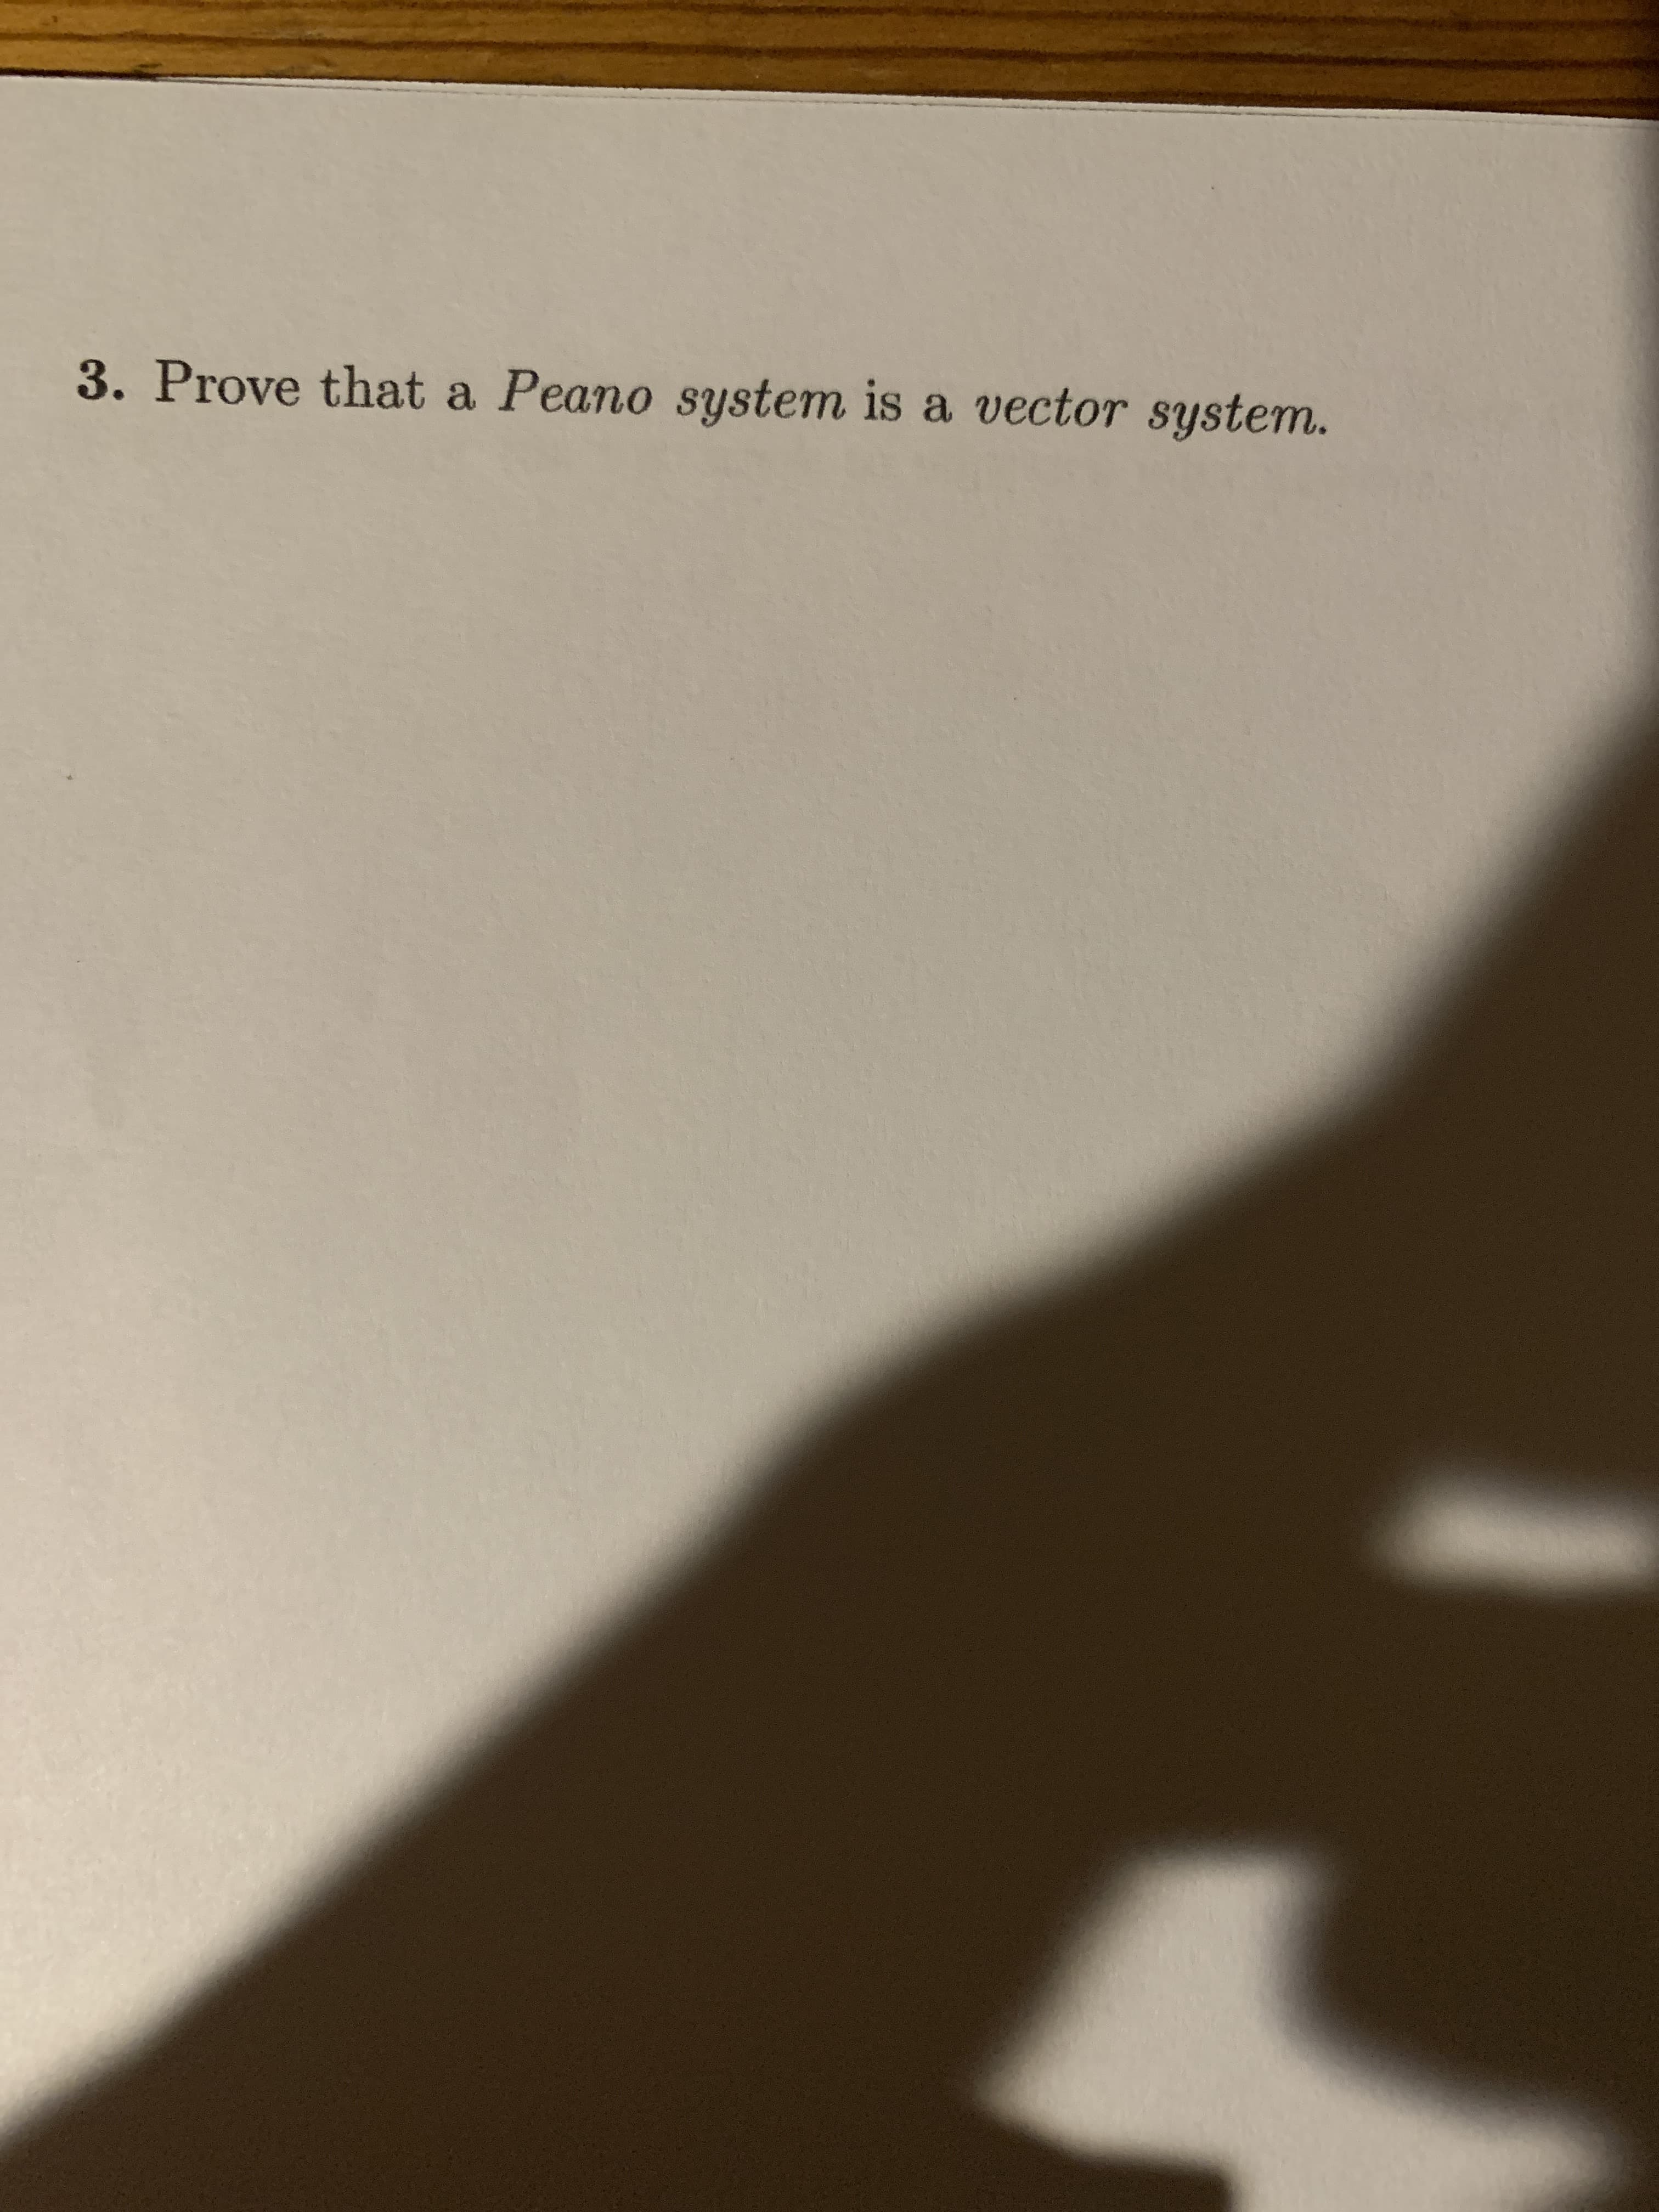 . Prove that a Peano system is a vector system.
